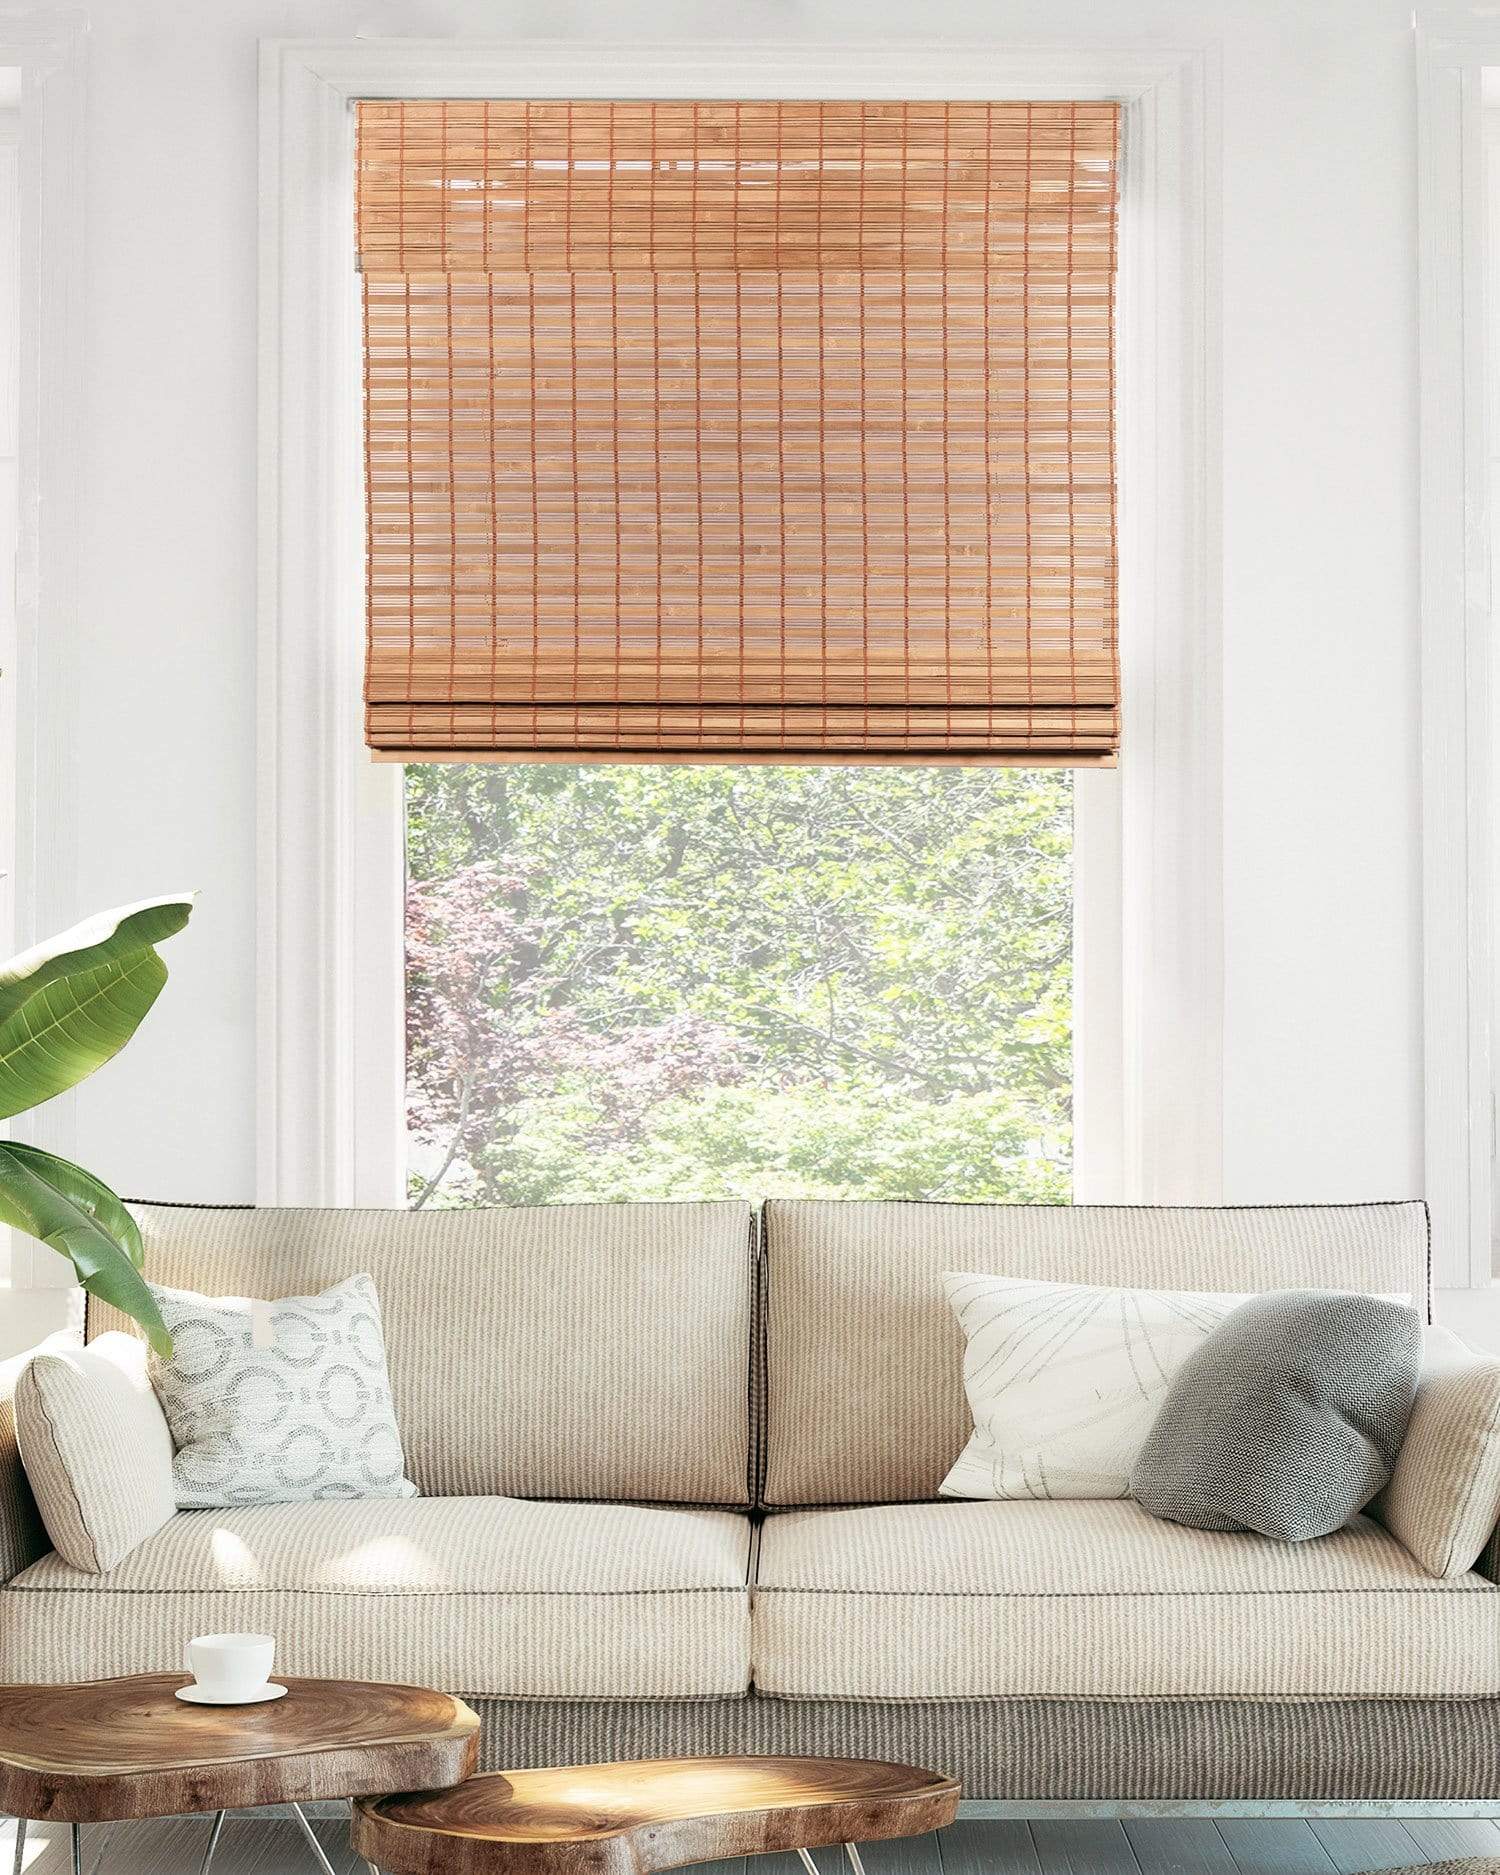 LazBlinds Cordless No Tools-No Drill 1 Vinyl Horizontal Mini Blinds, Light  Filtering Blinds for Windows, Blinds & Shades for Window Size 34 1/2 W x